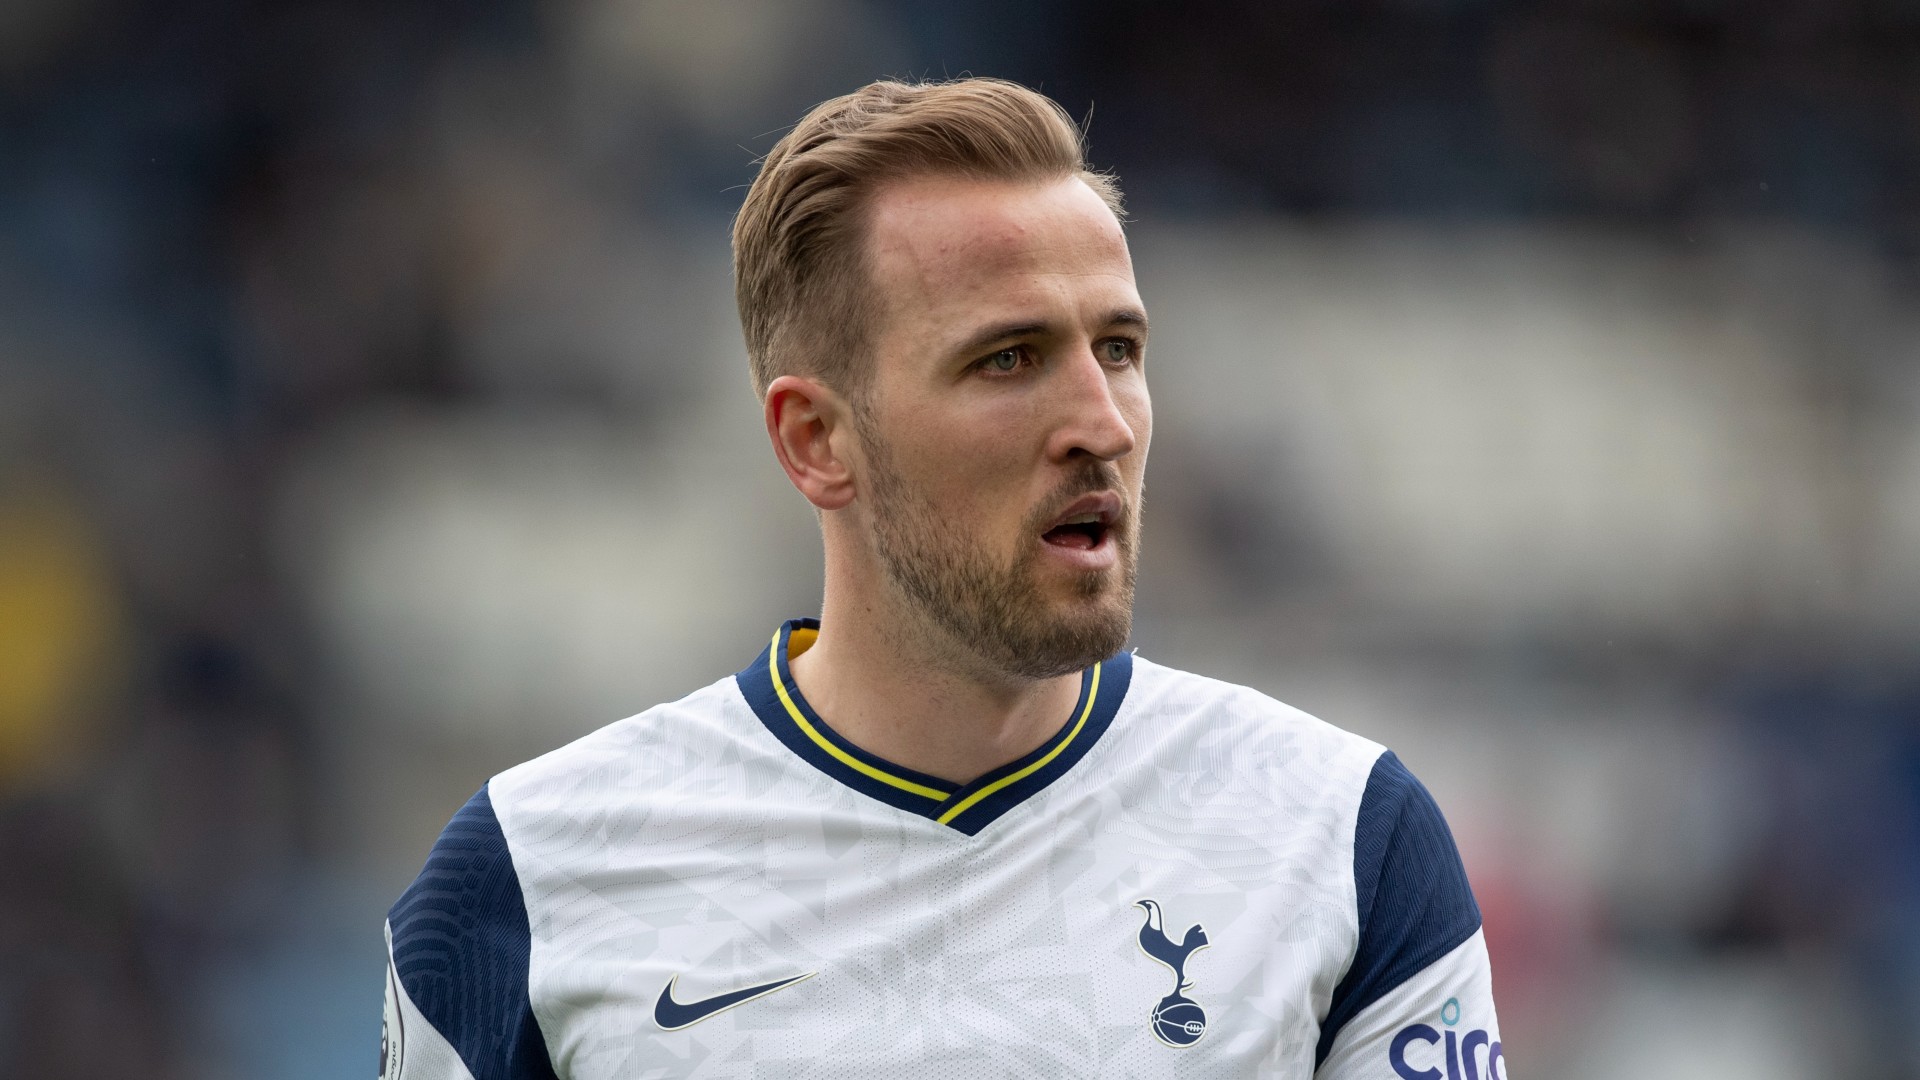 Manchester City have tabled a fresh £125m bid for Harry Kane who is unhappy with Tottenham's tactics after turning it down.